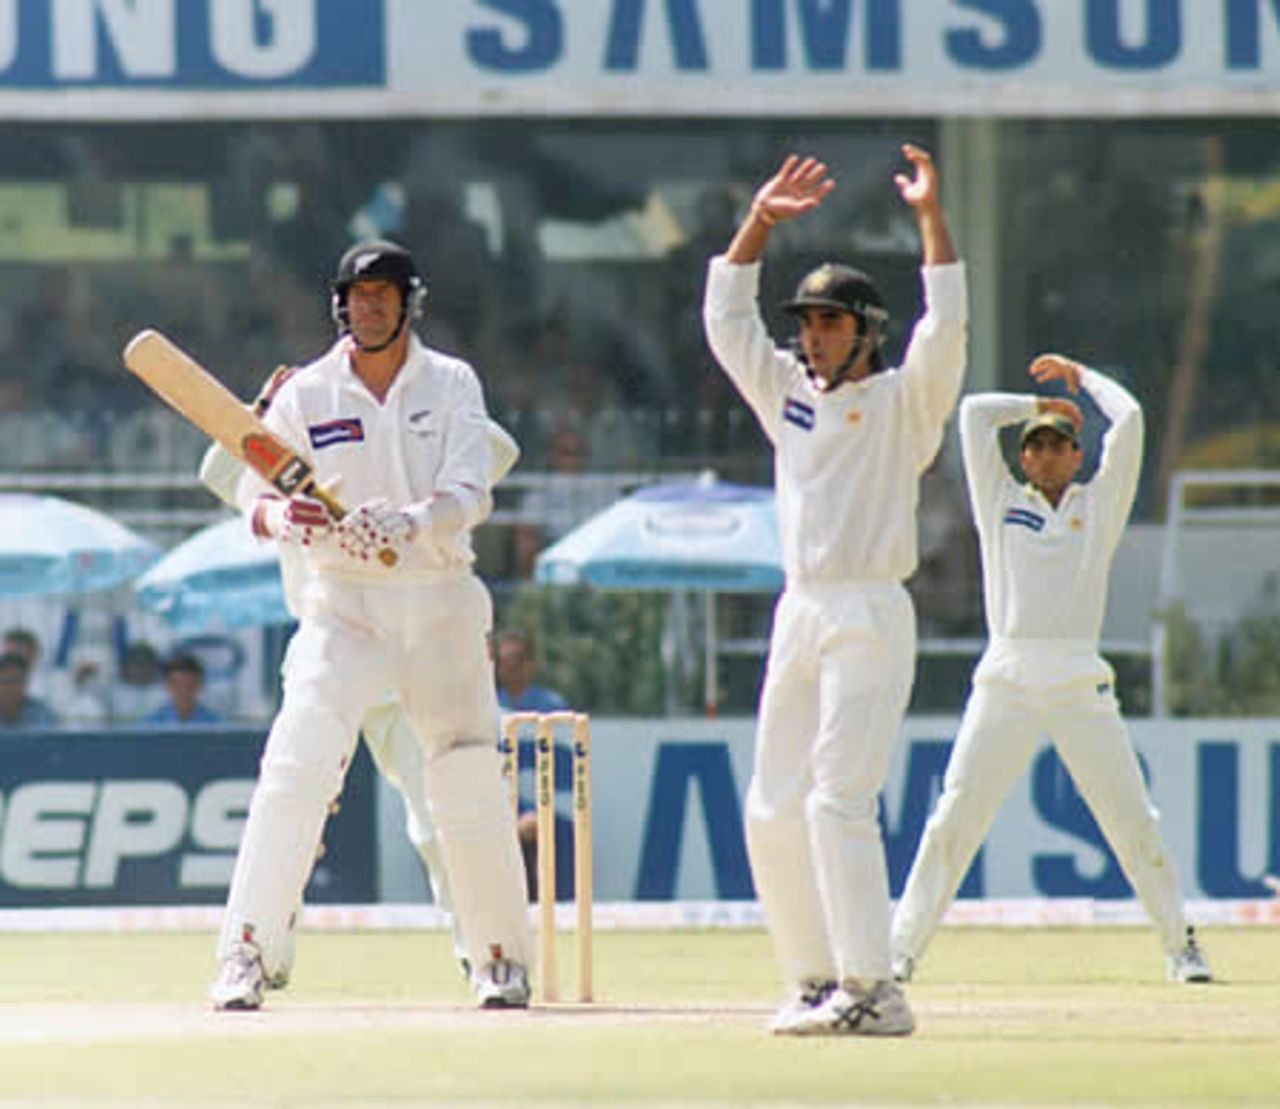 Daryl Tuffey survives an appeal - New Zealand first innings, day 3, 1st Test, New Zealand v Pakistan, Gaddafi Stadium Lahore, 3 May 2002